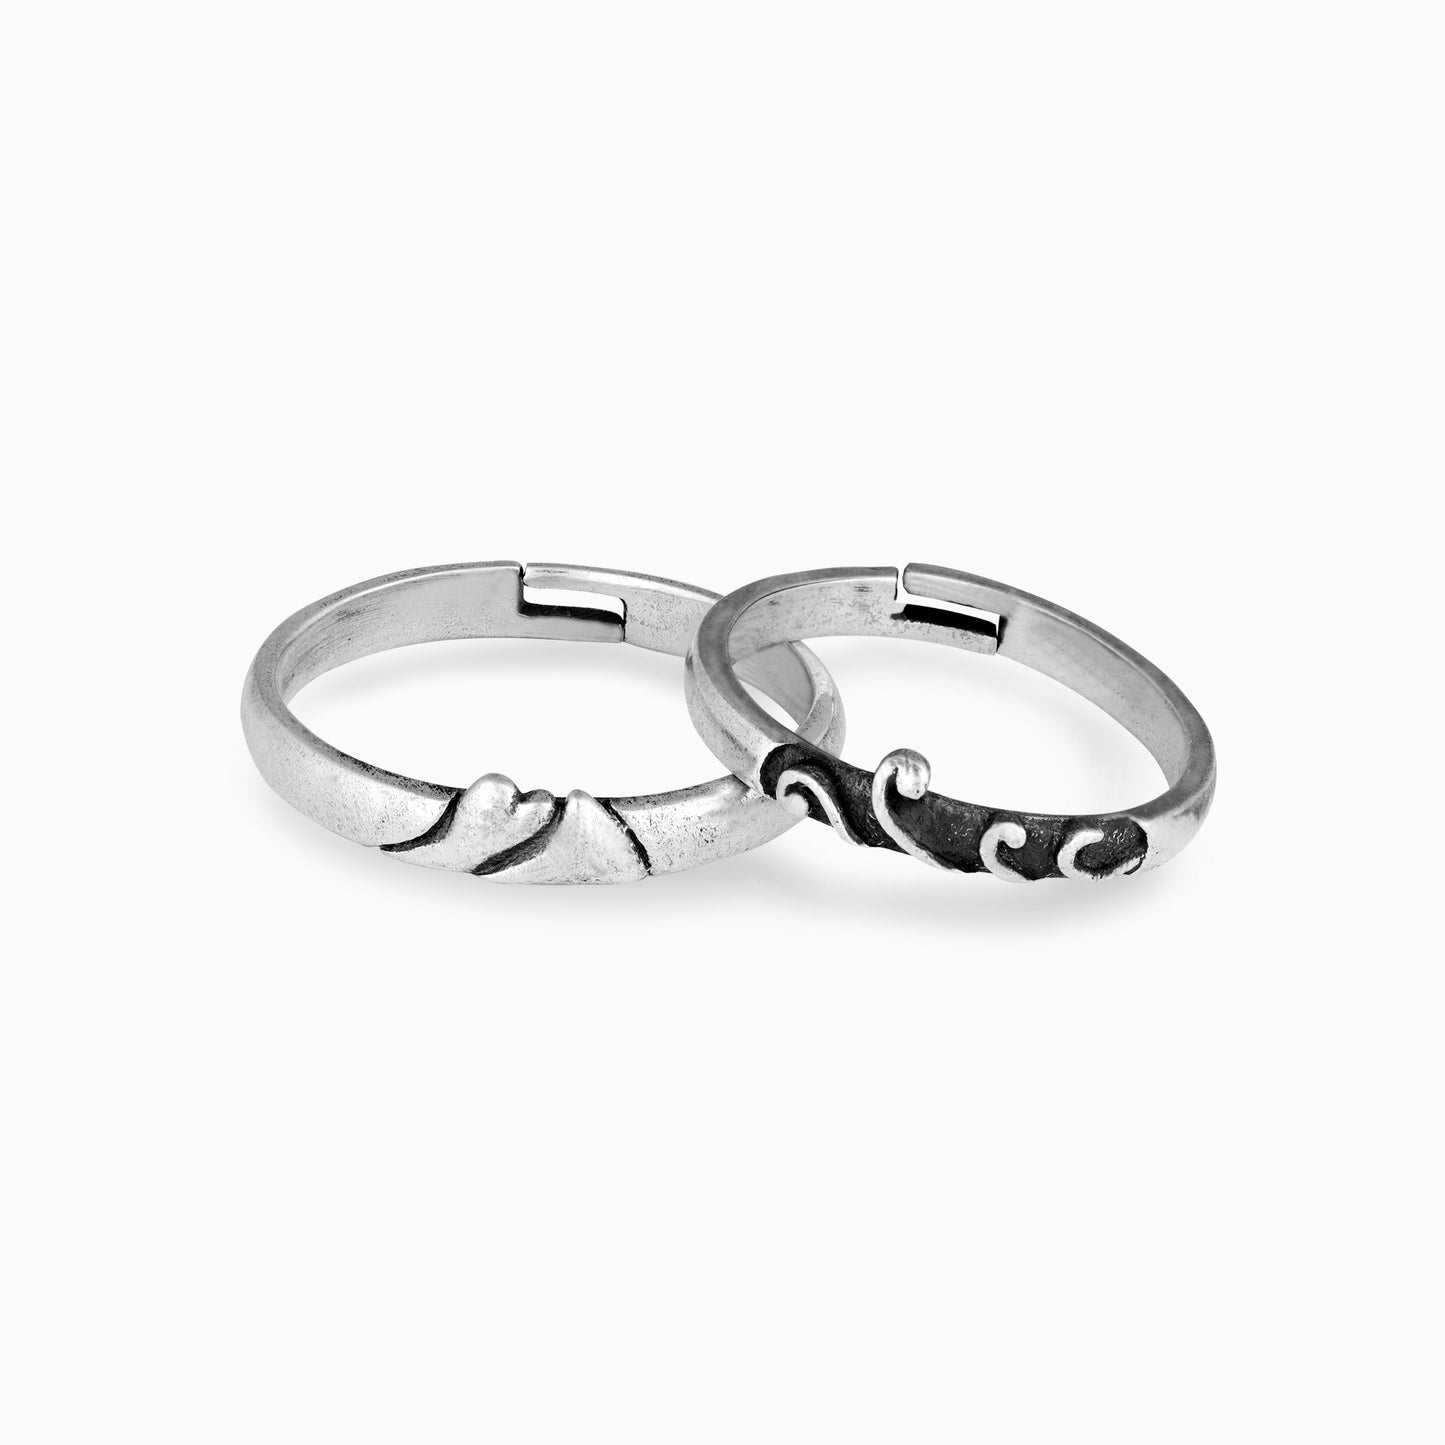 Oxidised Silver Motif Couple Bands